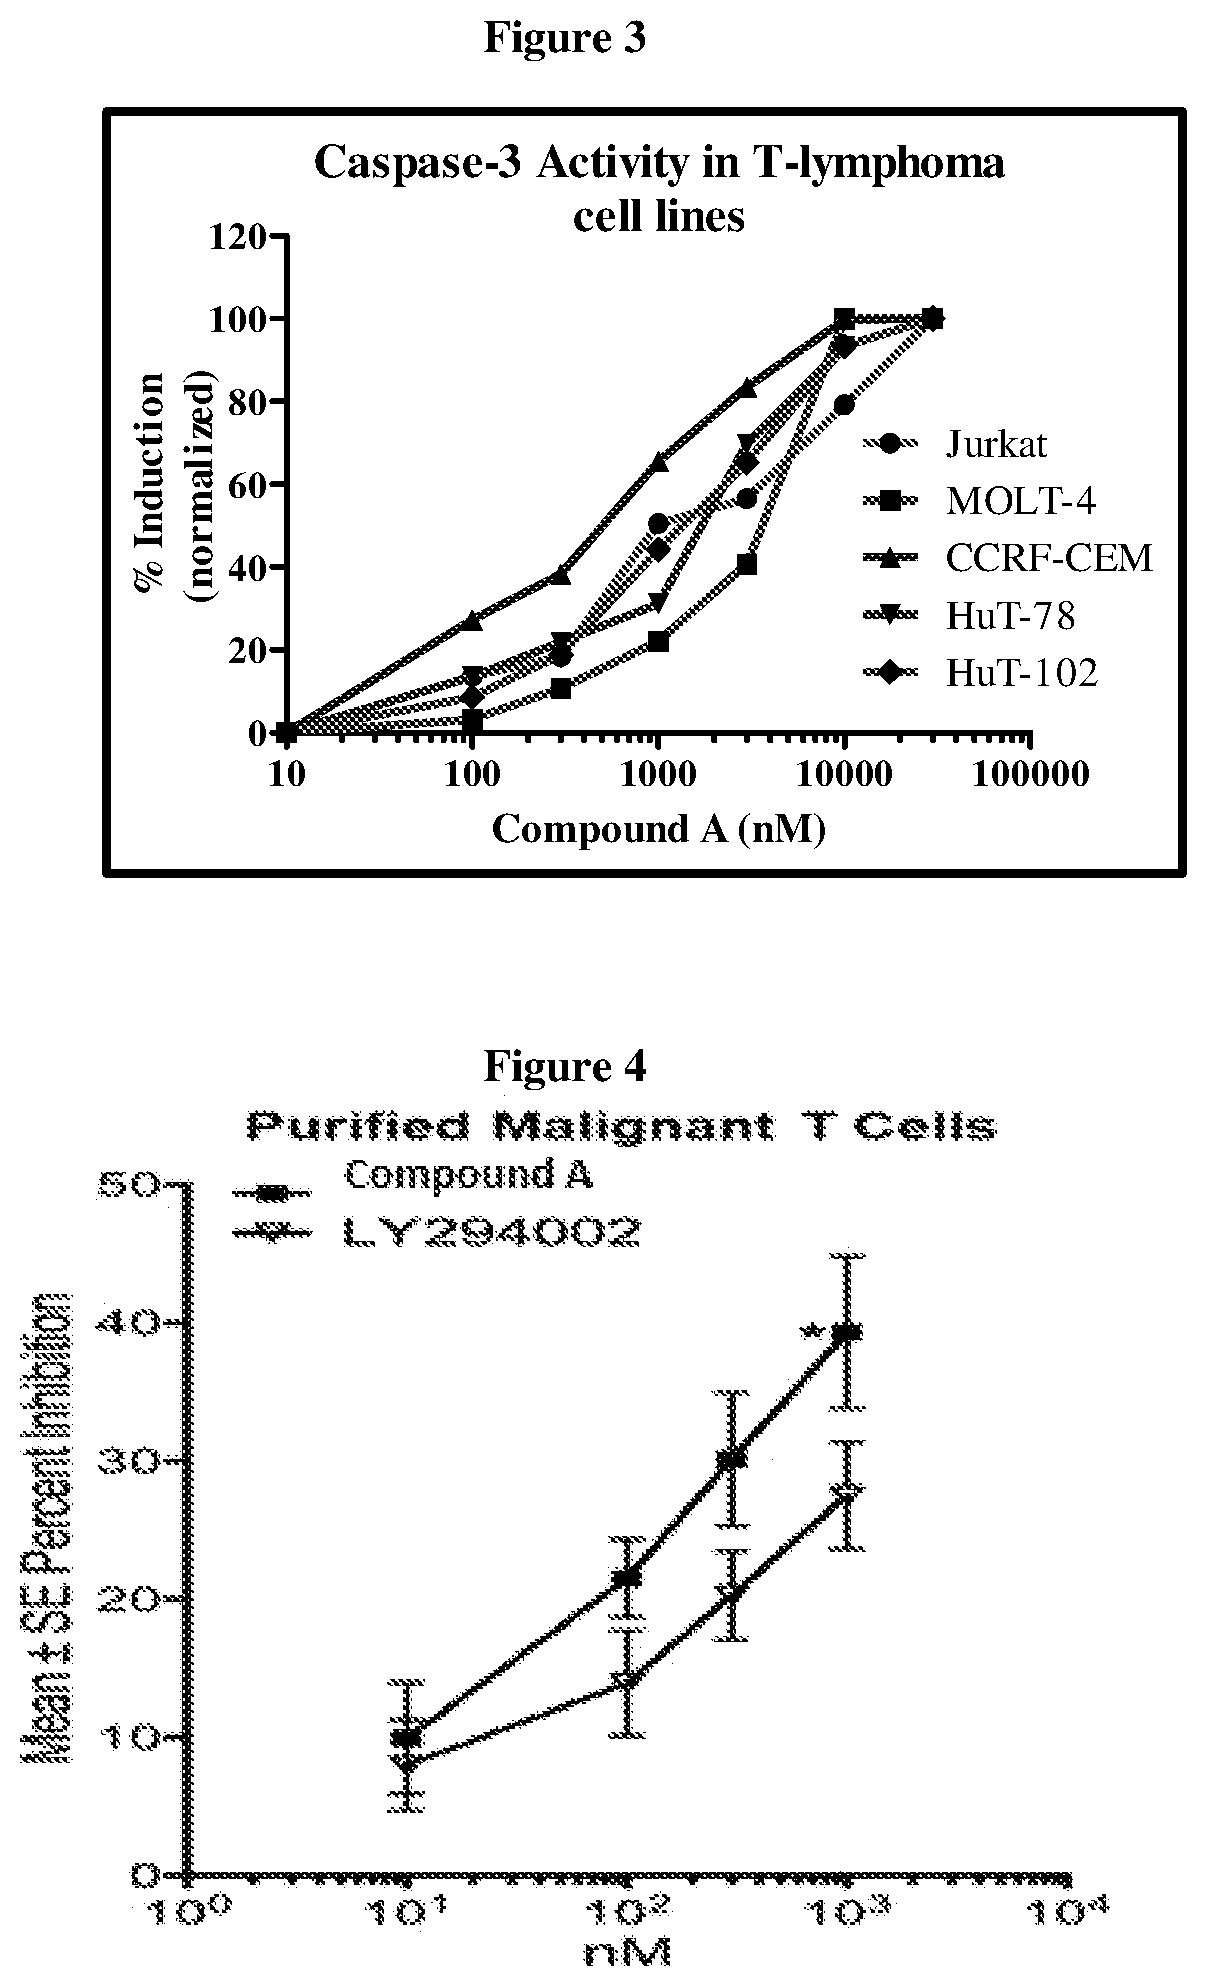 Composition and method for treating peripheral t-cell lymphoma and cutaneous t-cell lymphoma